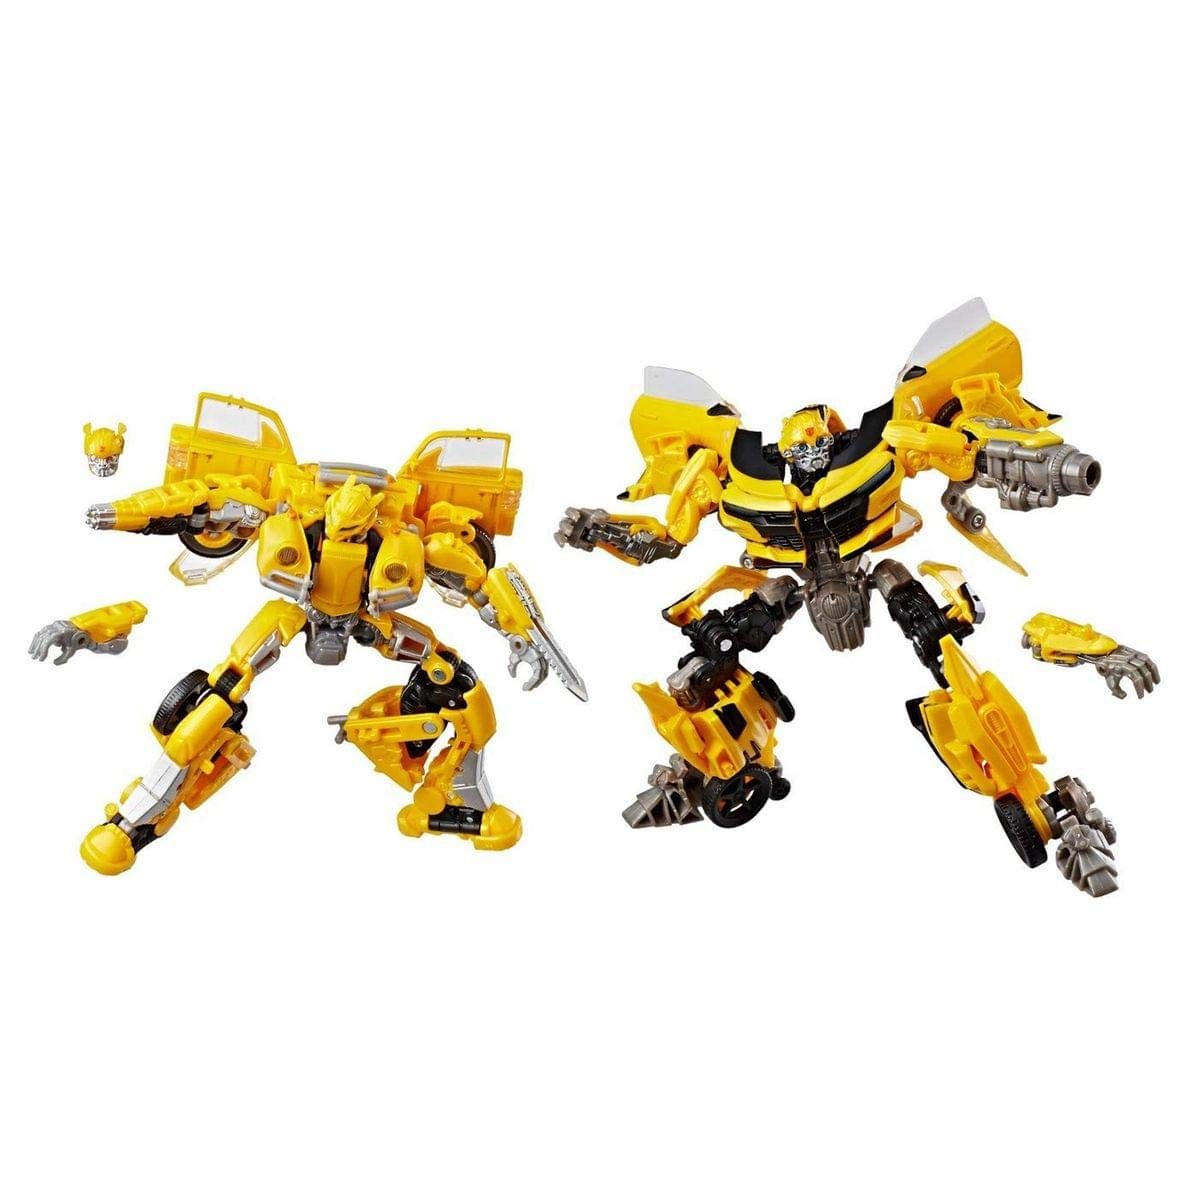 Transformers News: Studio Series 24 + 25 Bumblebee set only $9.99 today only at EntertainmentEarth.com